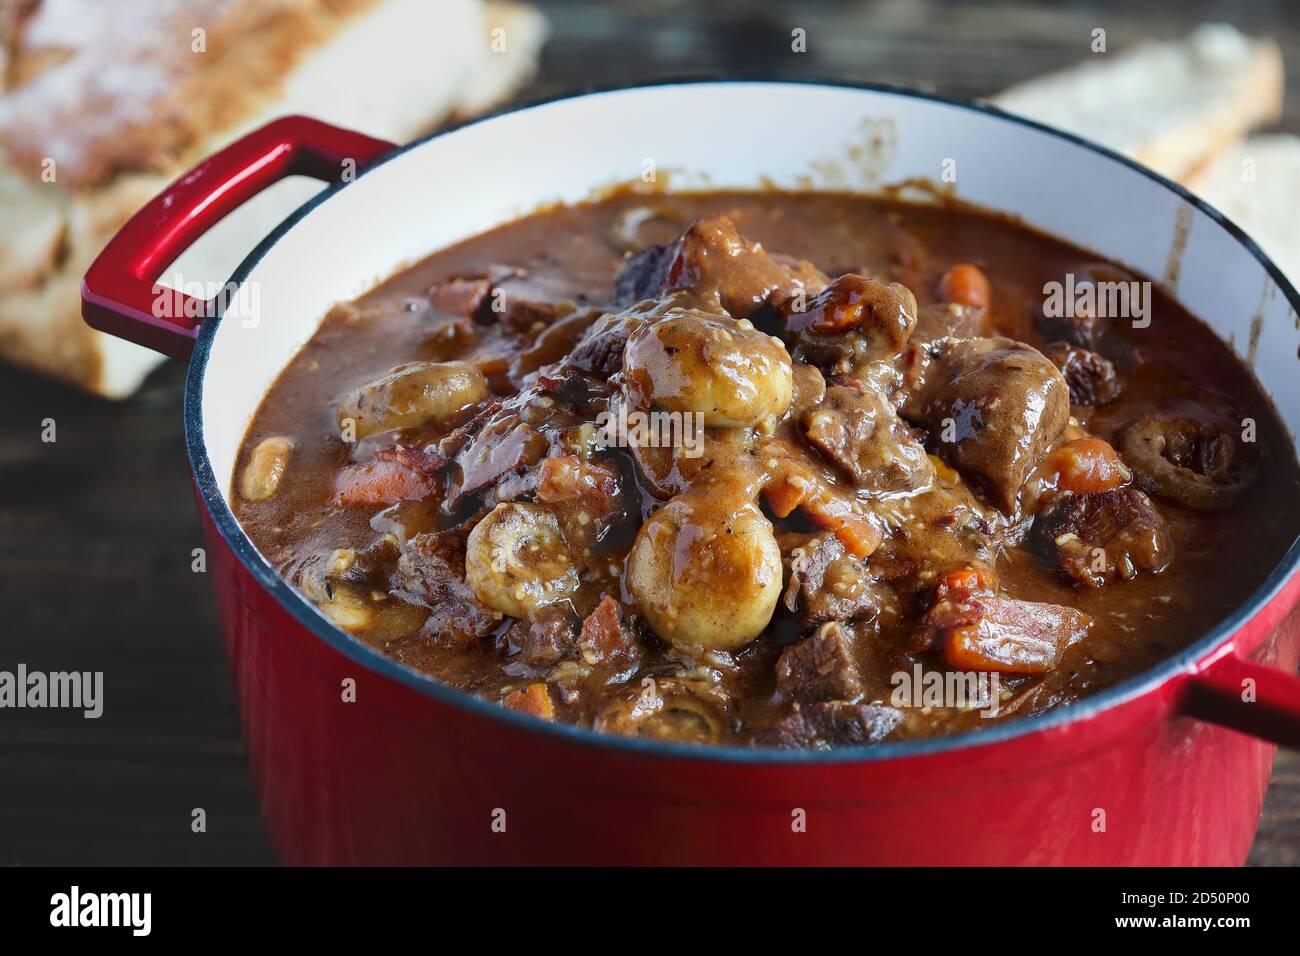 Beef Bourguignon cooked in an enameled cast iron Dutch oven and served with homemade artisan bread over a rustic wood background. Stock Photo